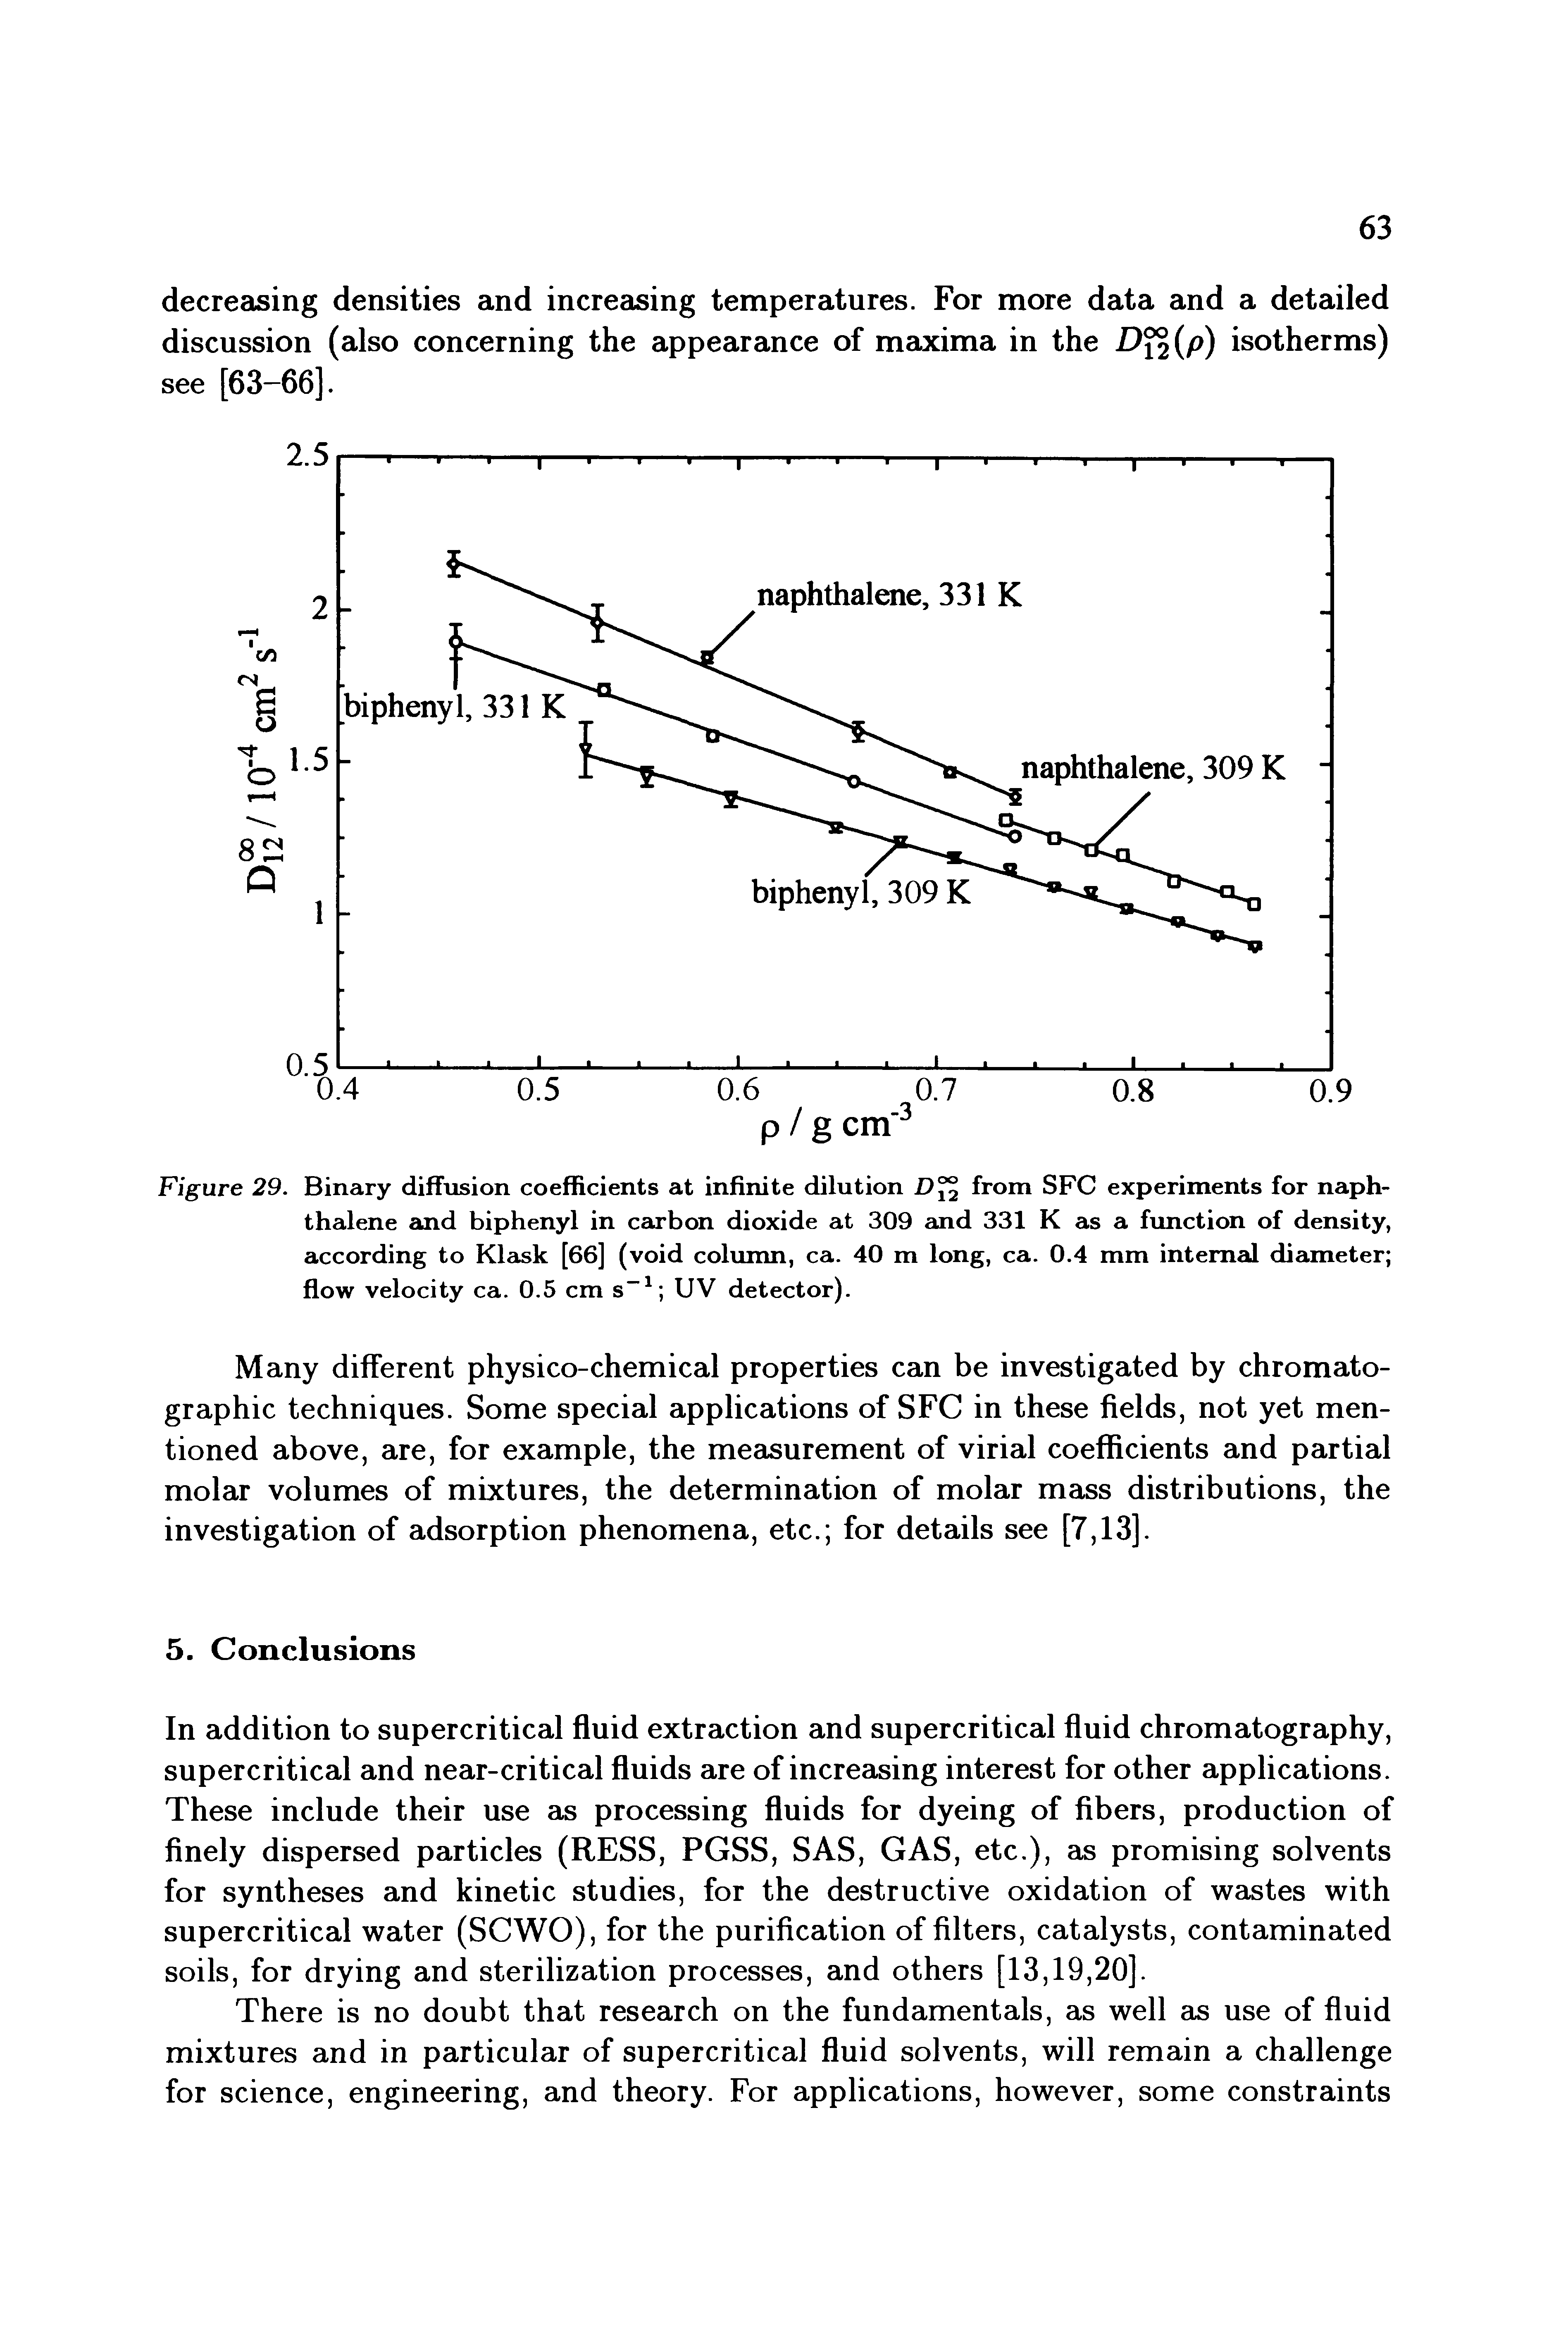 Figure 29. Binary diffusion coefficients at infinite dilution DJJ from SFC experiments for naphthalene and biphenyl in cEirbon dioxide at 309 tnd 331 K as a fimction of density, according to Klask [66] (void column, ca. 40 m long, ca. 0.4 mm internal diameter flow velocity ca. 0.5 cm s UV detector).